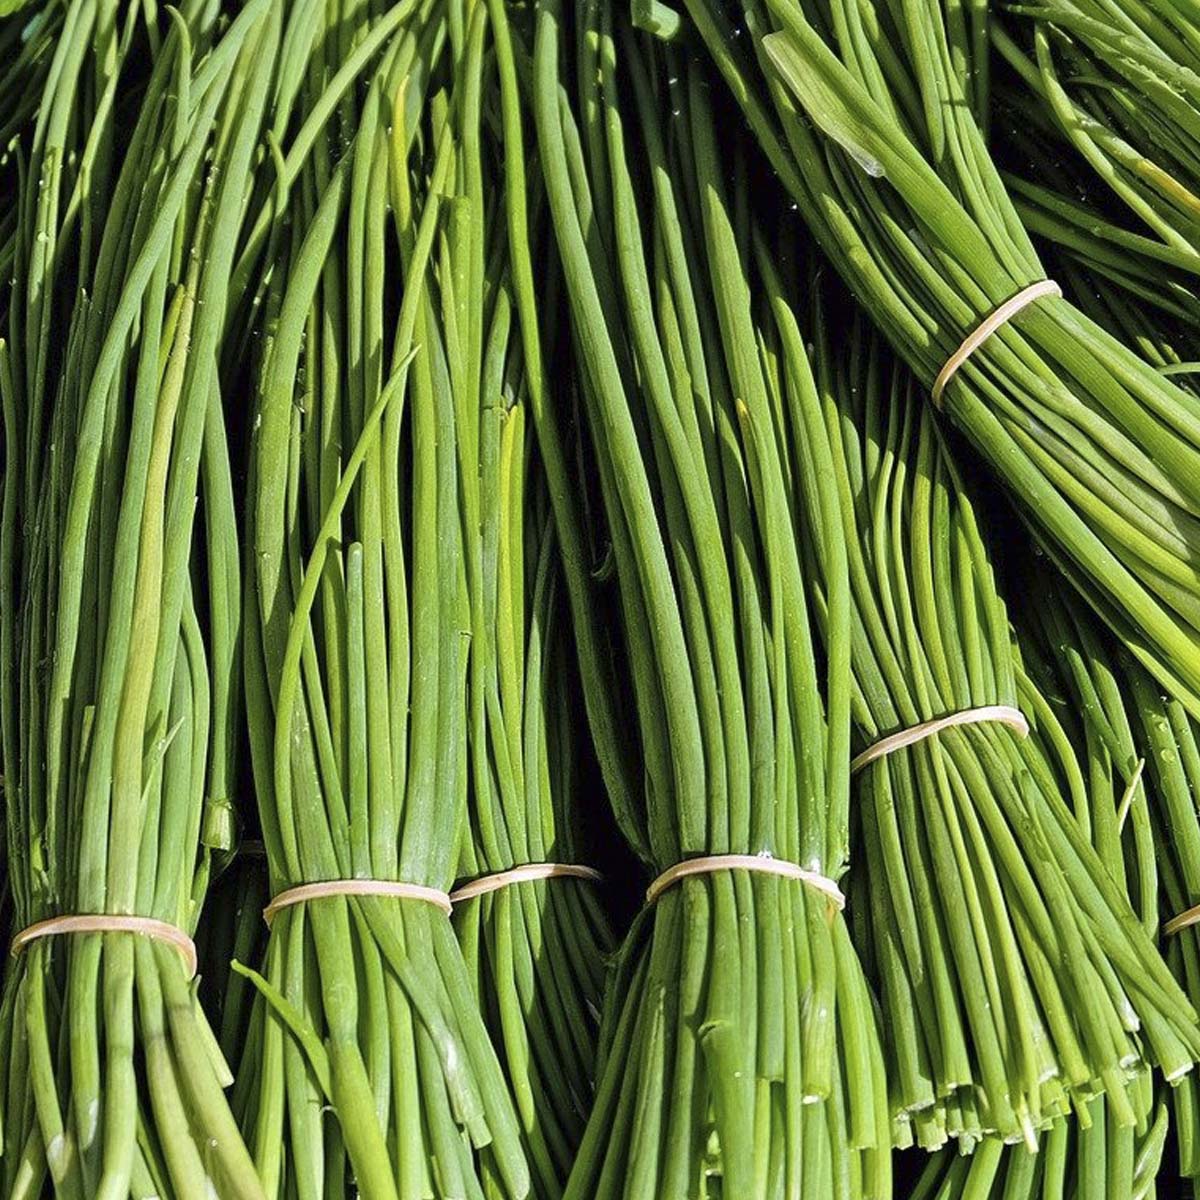 Tied bundles of cut chives